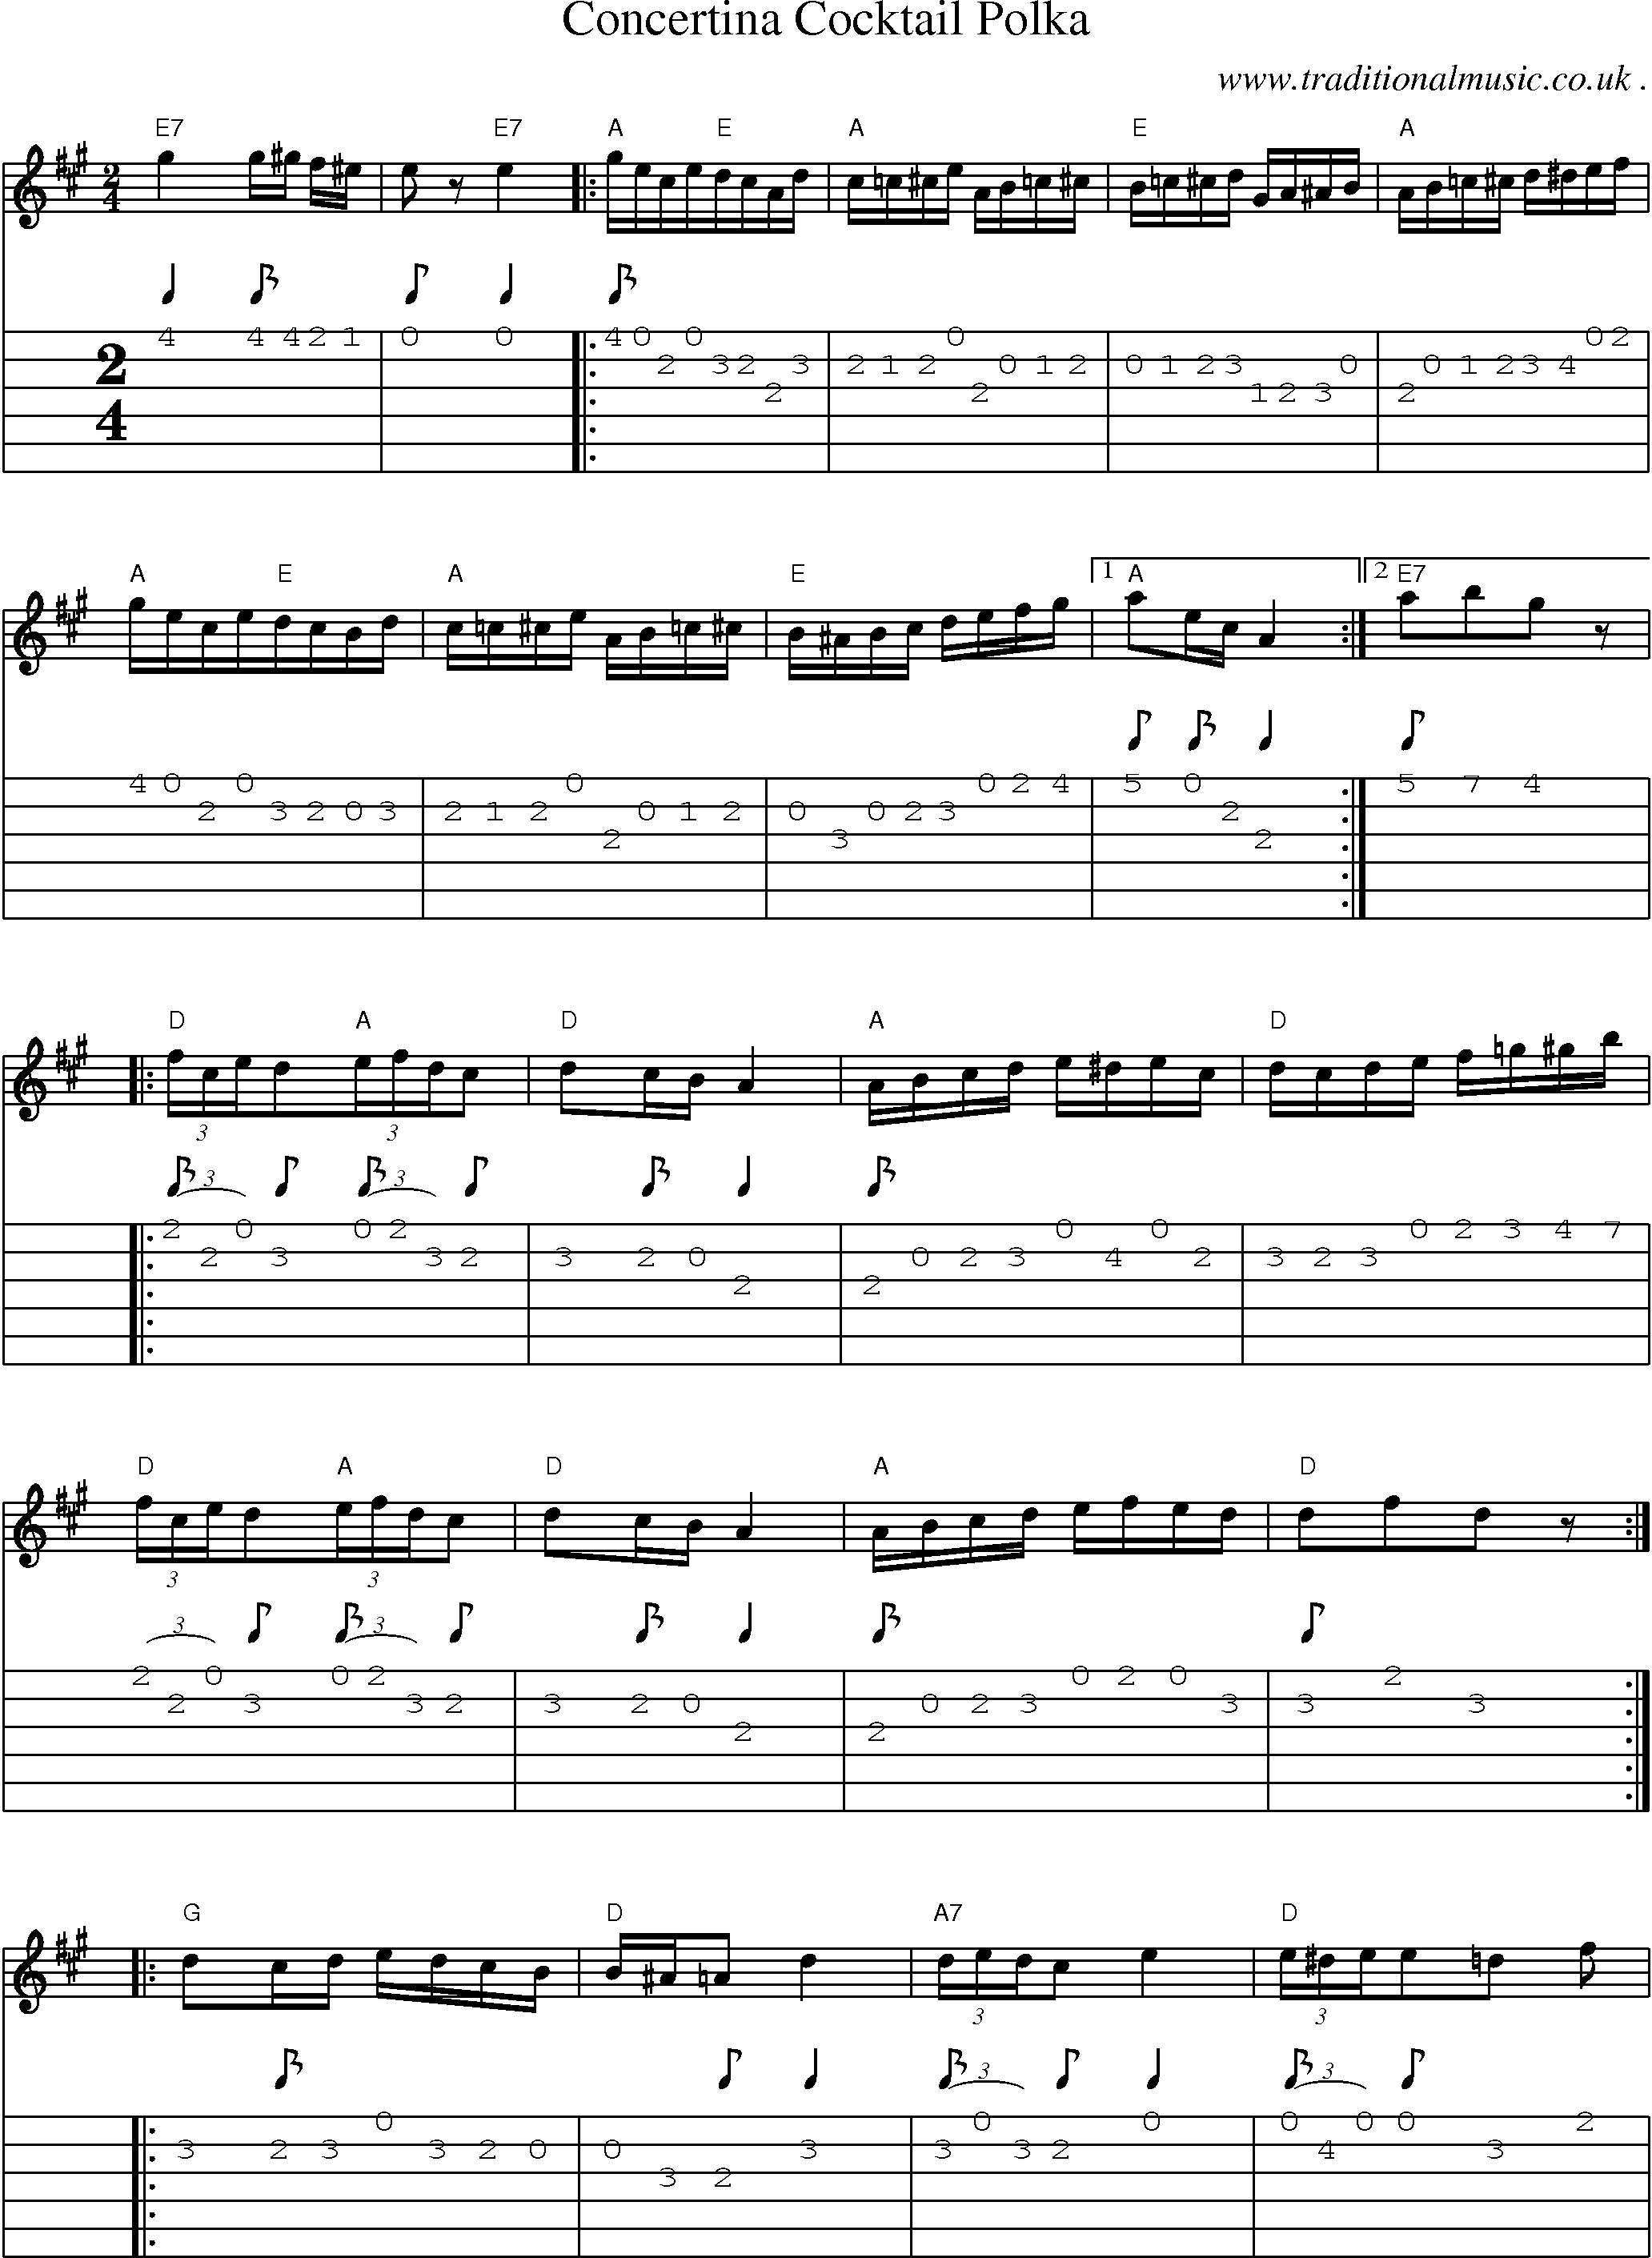 Sheet-Music and Guitar Tabs for Concertina Cocktail Polka